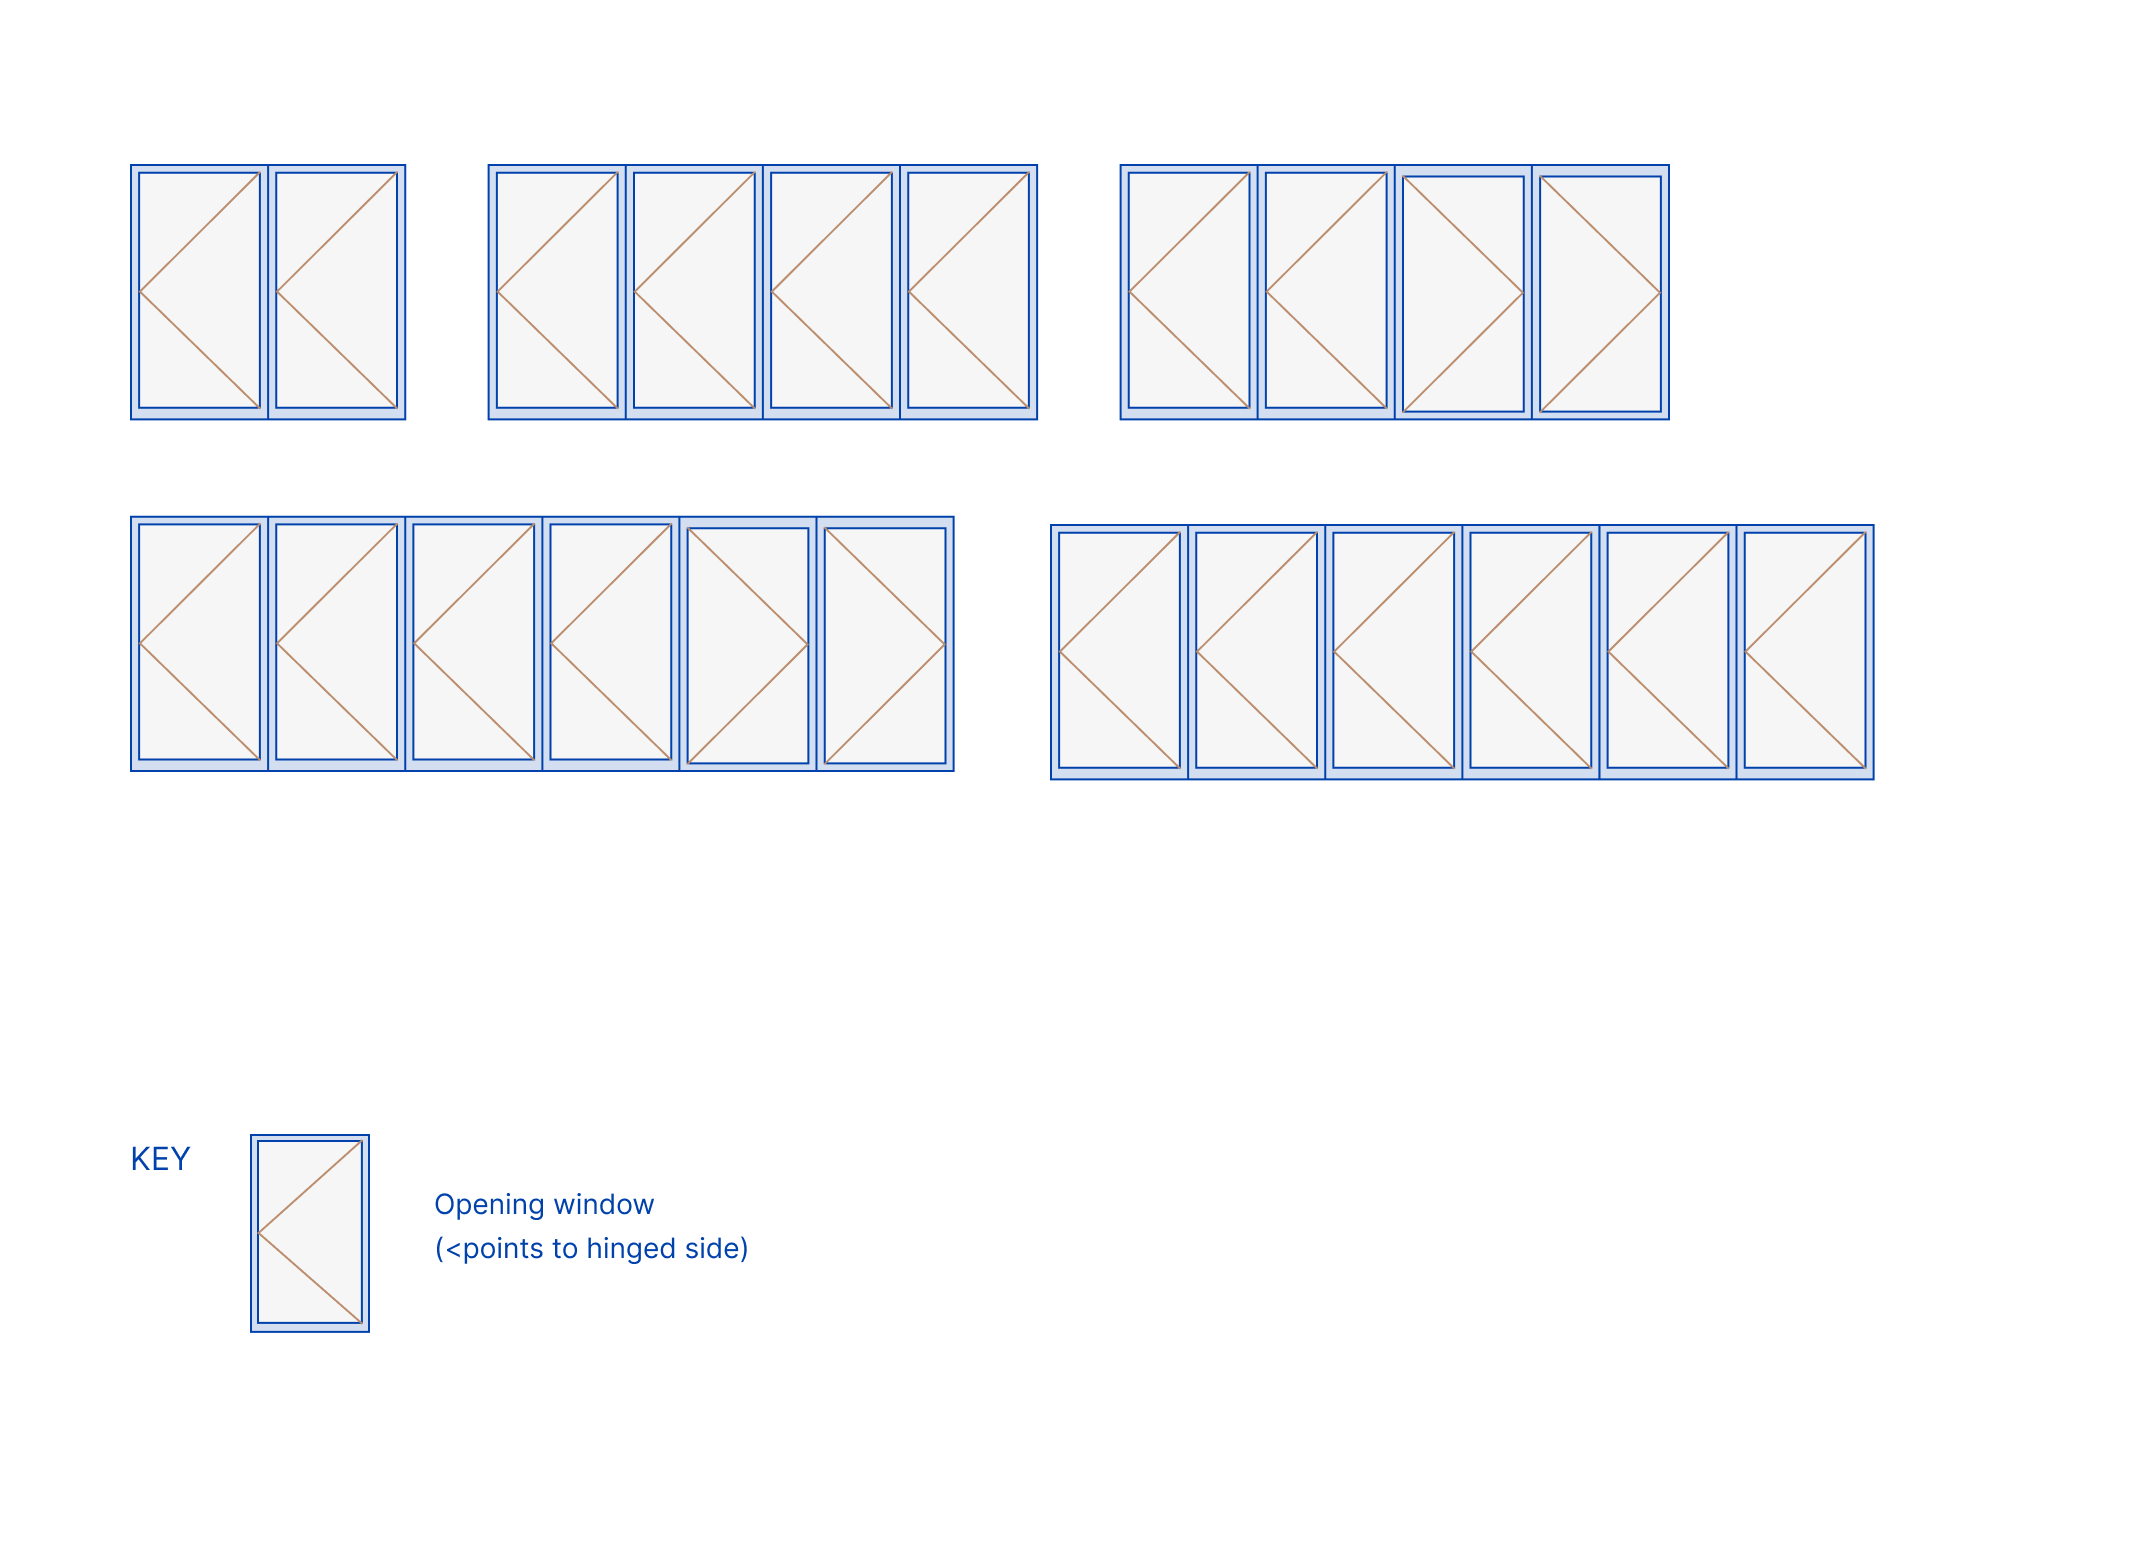 Duco Windows and Bifold option diagrams